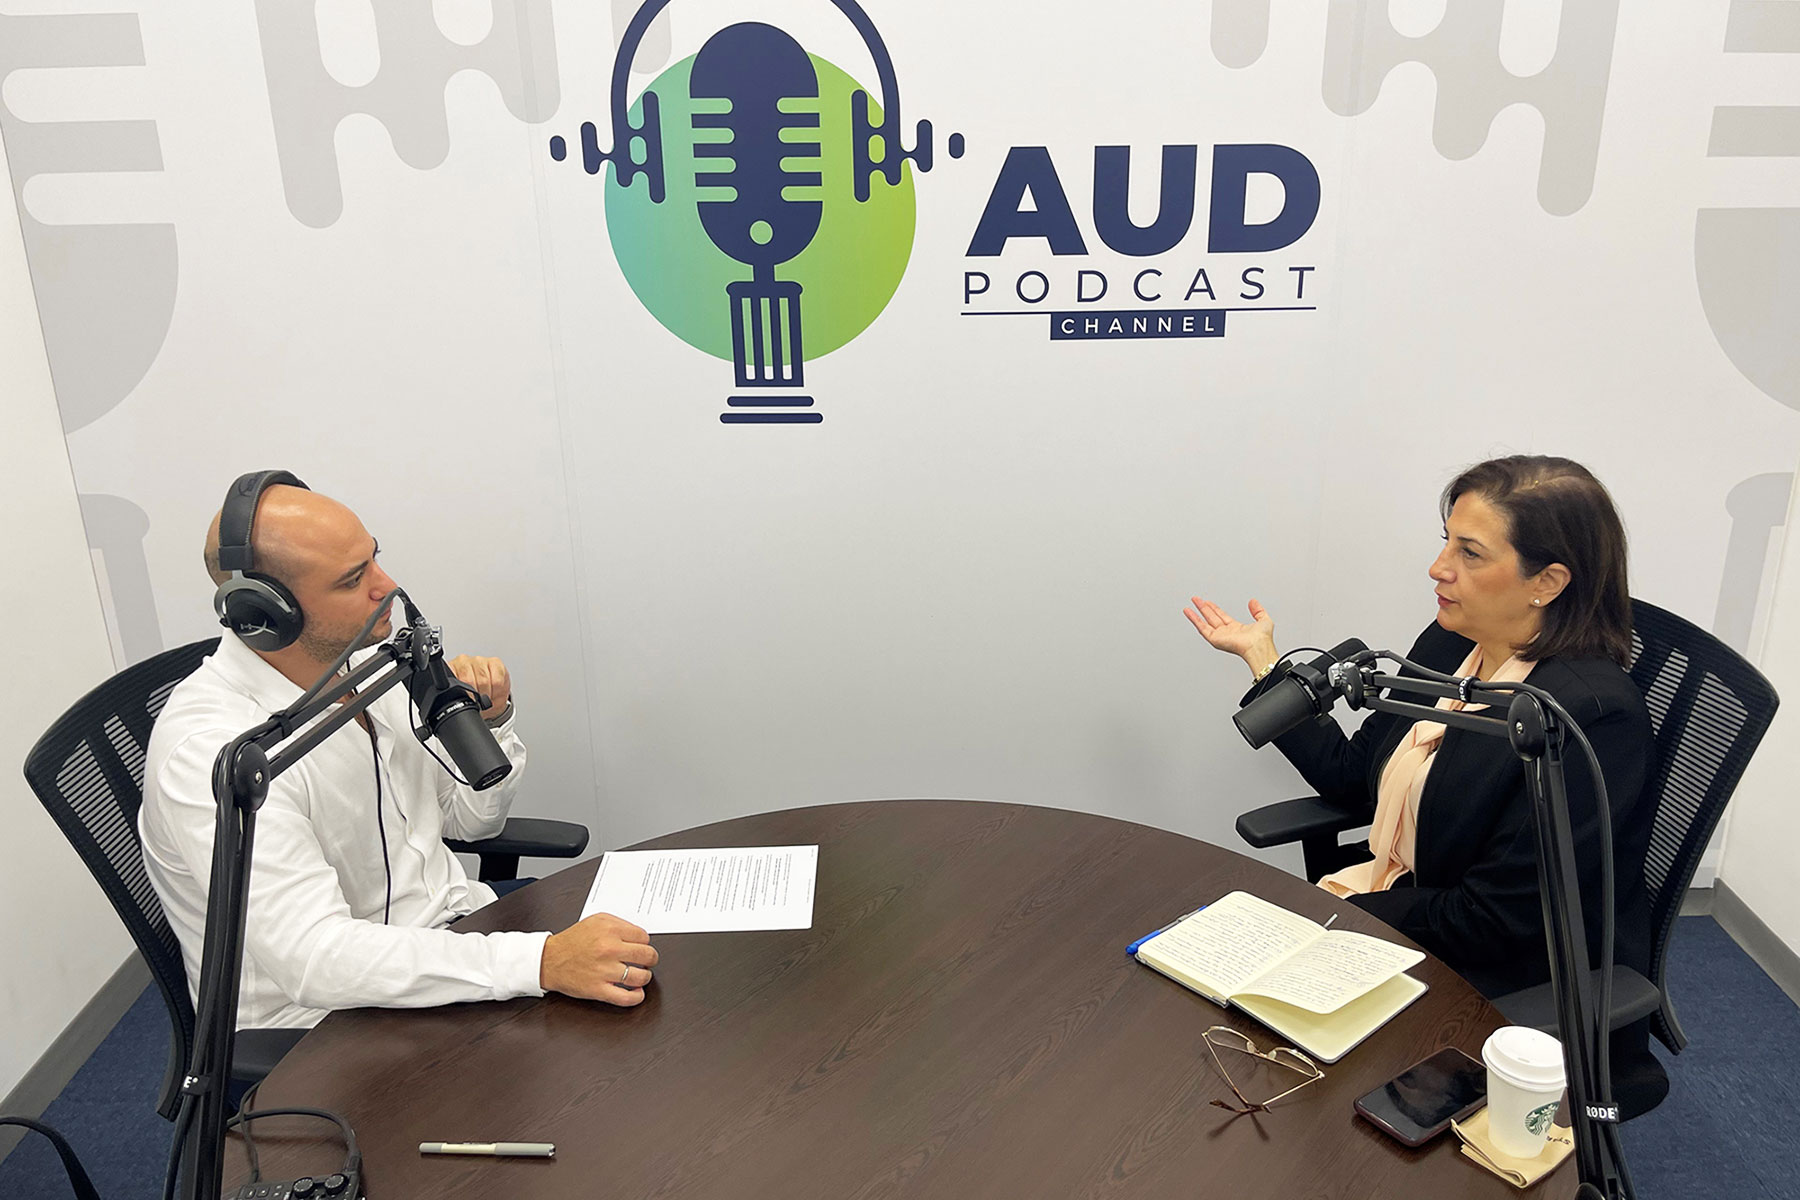 Podcast episode of the month with Dr. Rola Hammoud, Chief Medical Executive, Clemenceau Medical Center Dubai